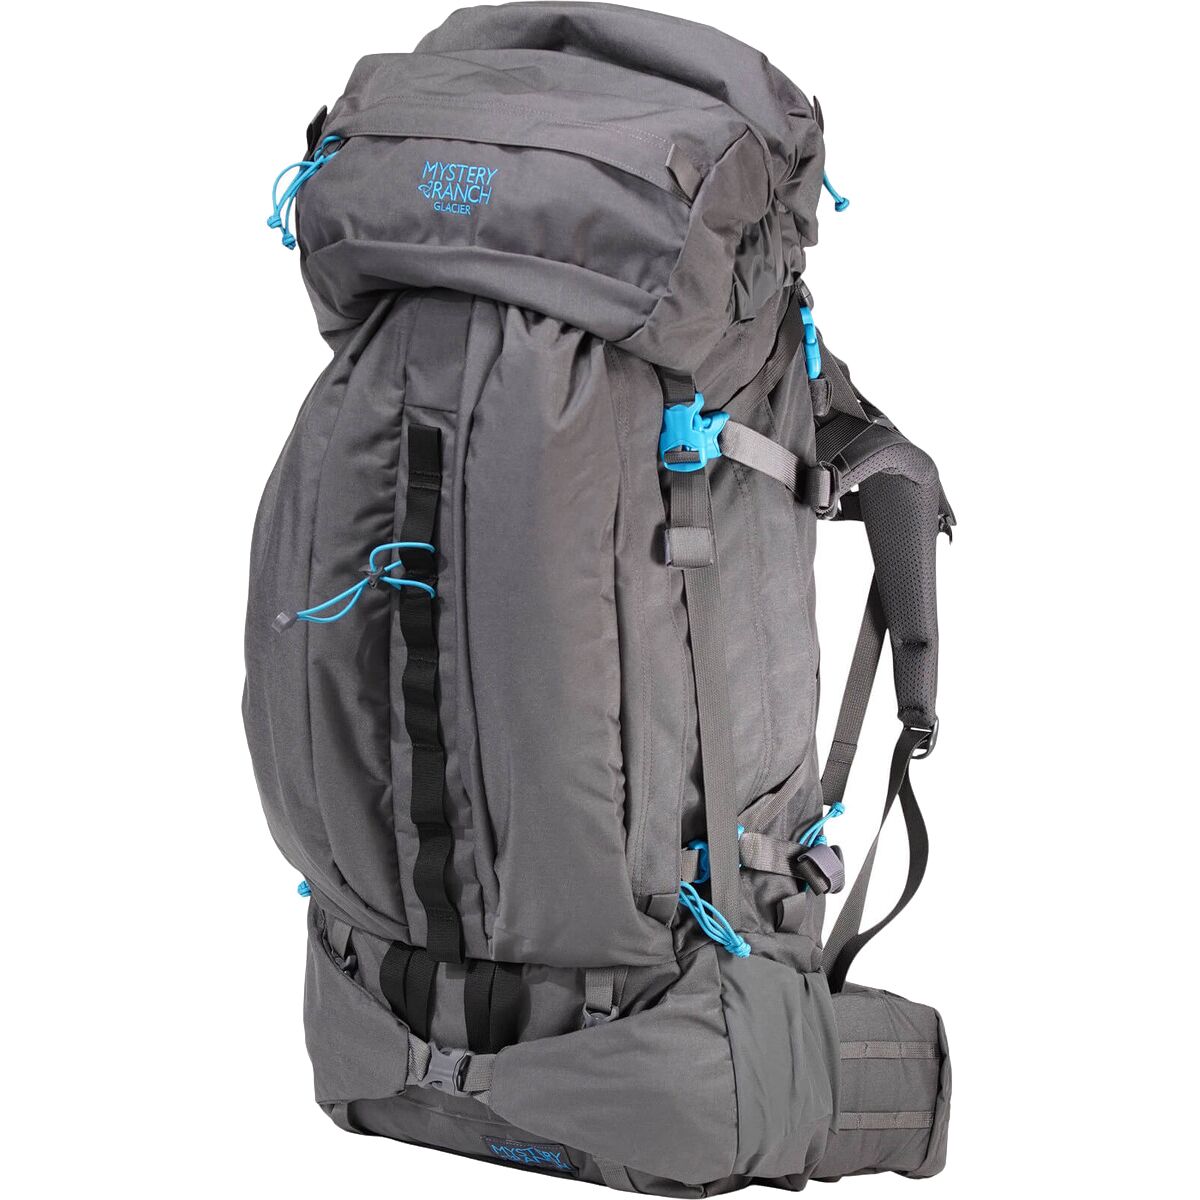 Photos - Backpack Mystery Ranch Glacier 71L  - Women's 